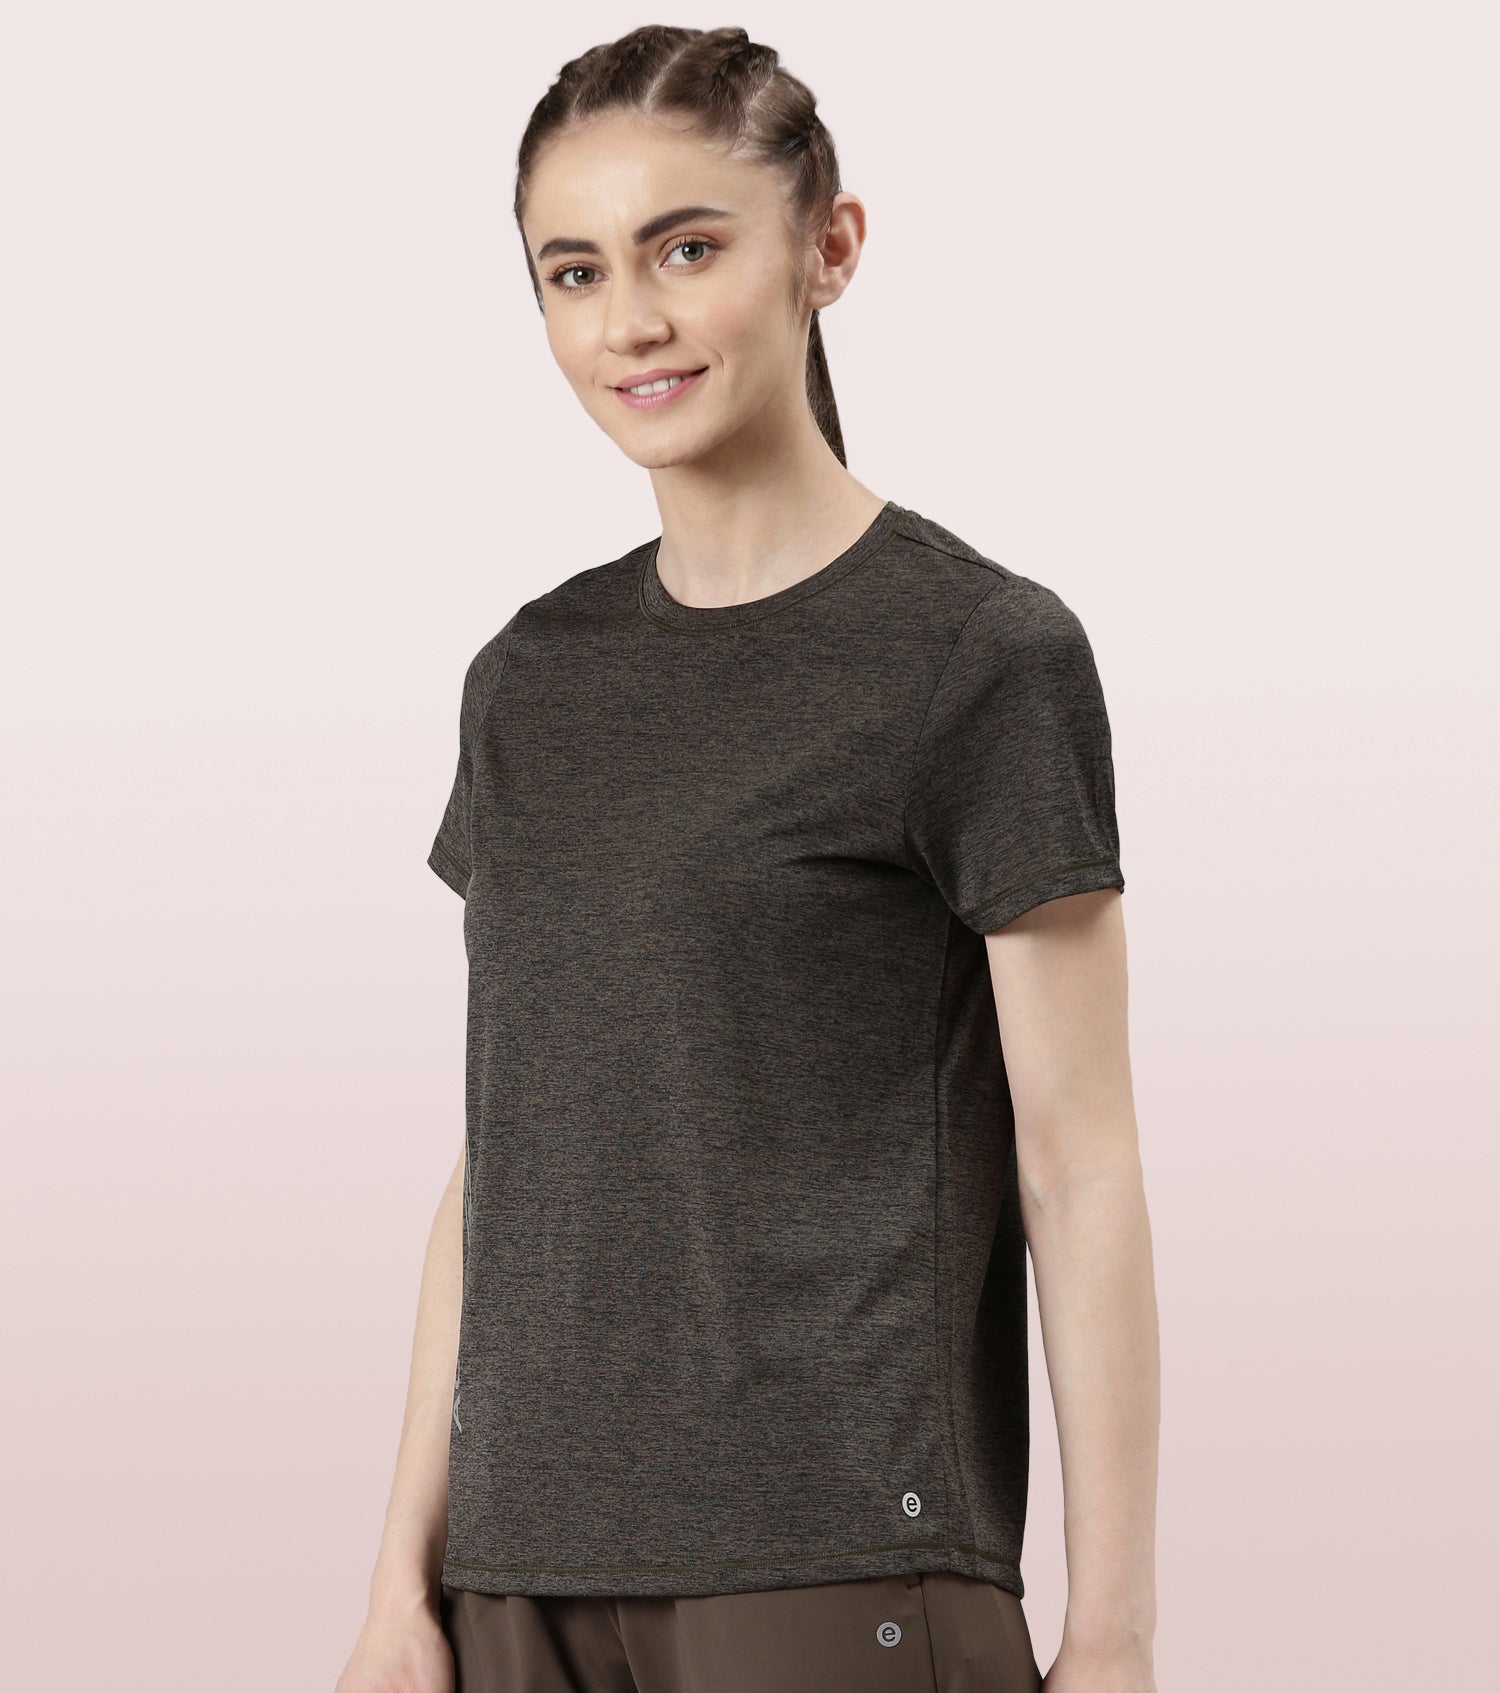 Athleisure- A309
BASIC WORKOUT CREW TEE | DRY FIT CREW NECK ACTIVEWEAR TEE
RELAXED FIT | REGULAR LENGTH